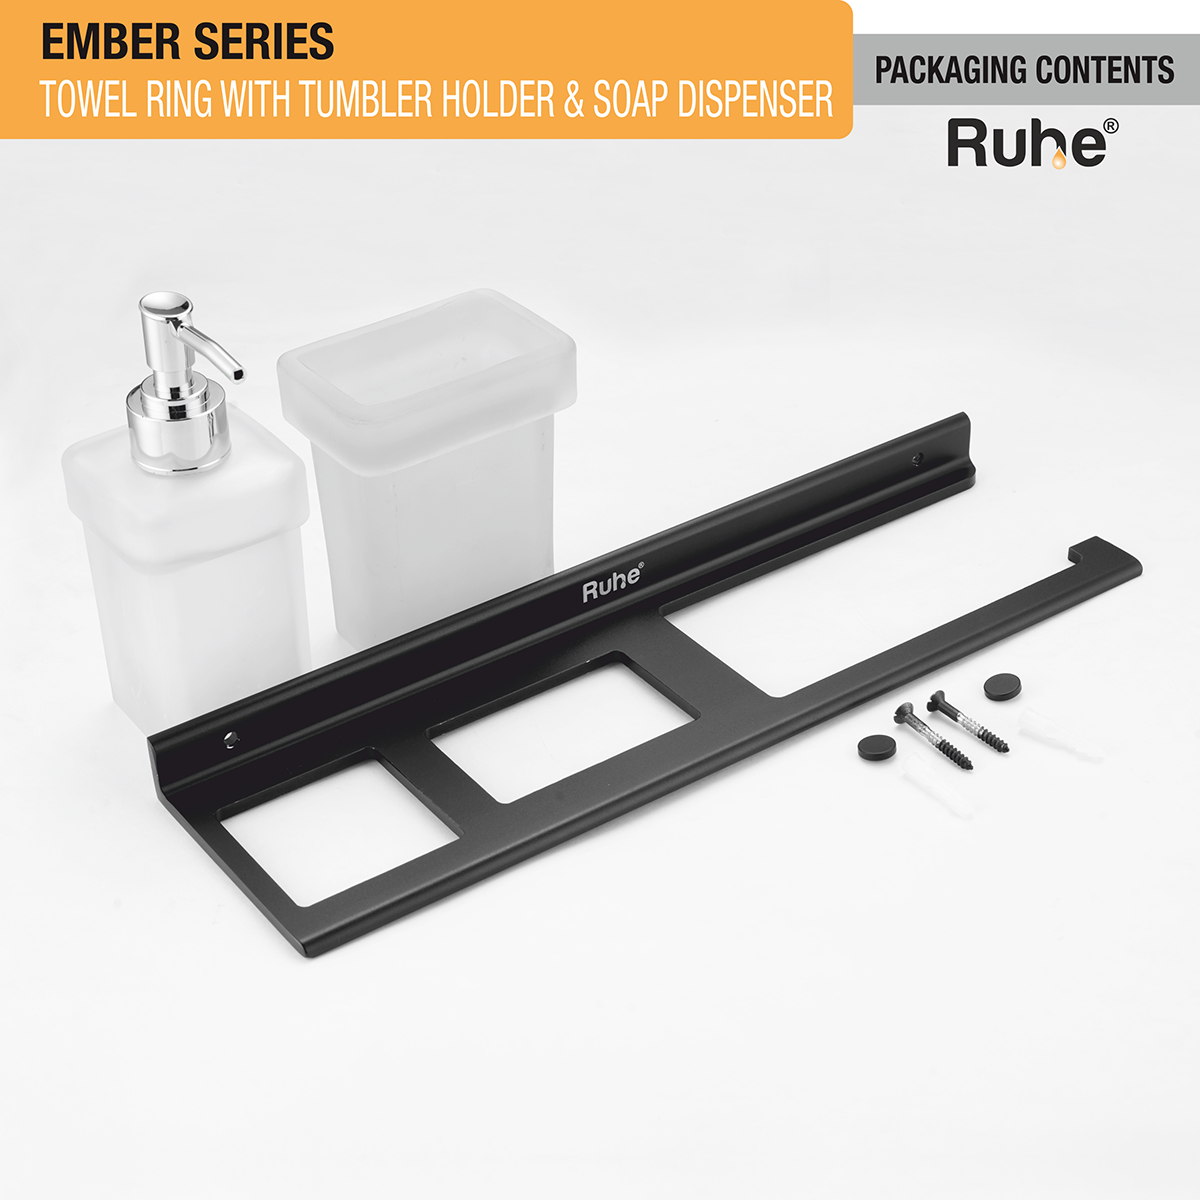 Ember Towel Ring with Tumbler Holder & Soap Dispenser (Space Aluminium) package content